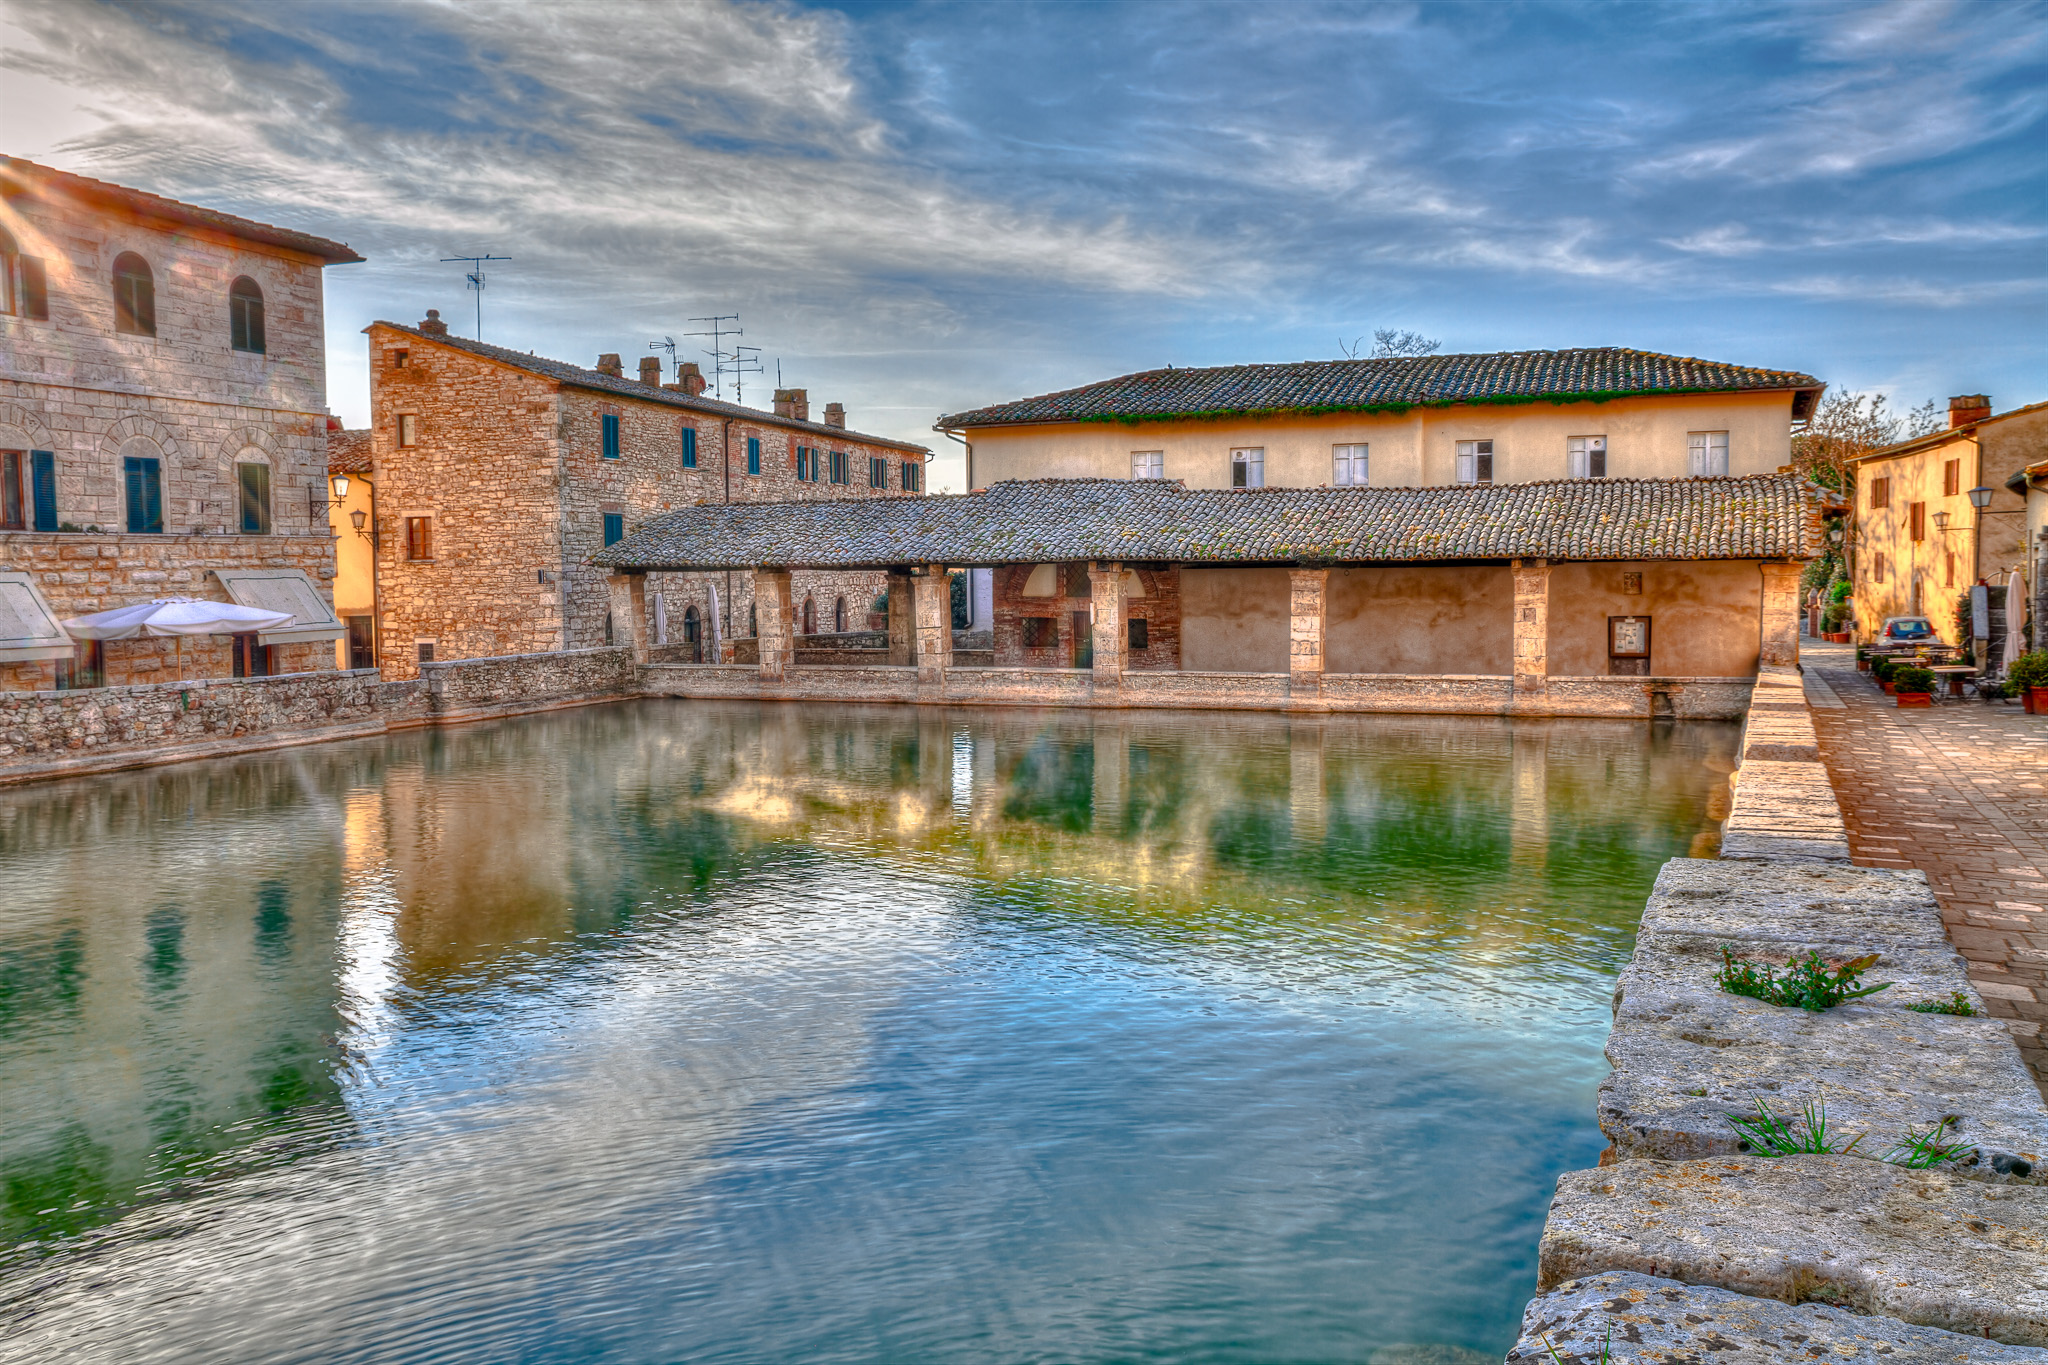 Bagno Vignoni, Siena, Tuscany, Italy: ancient thermal baths in t